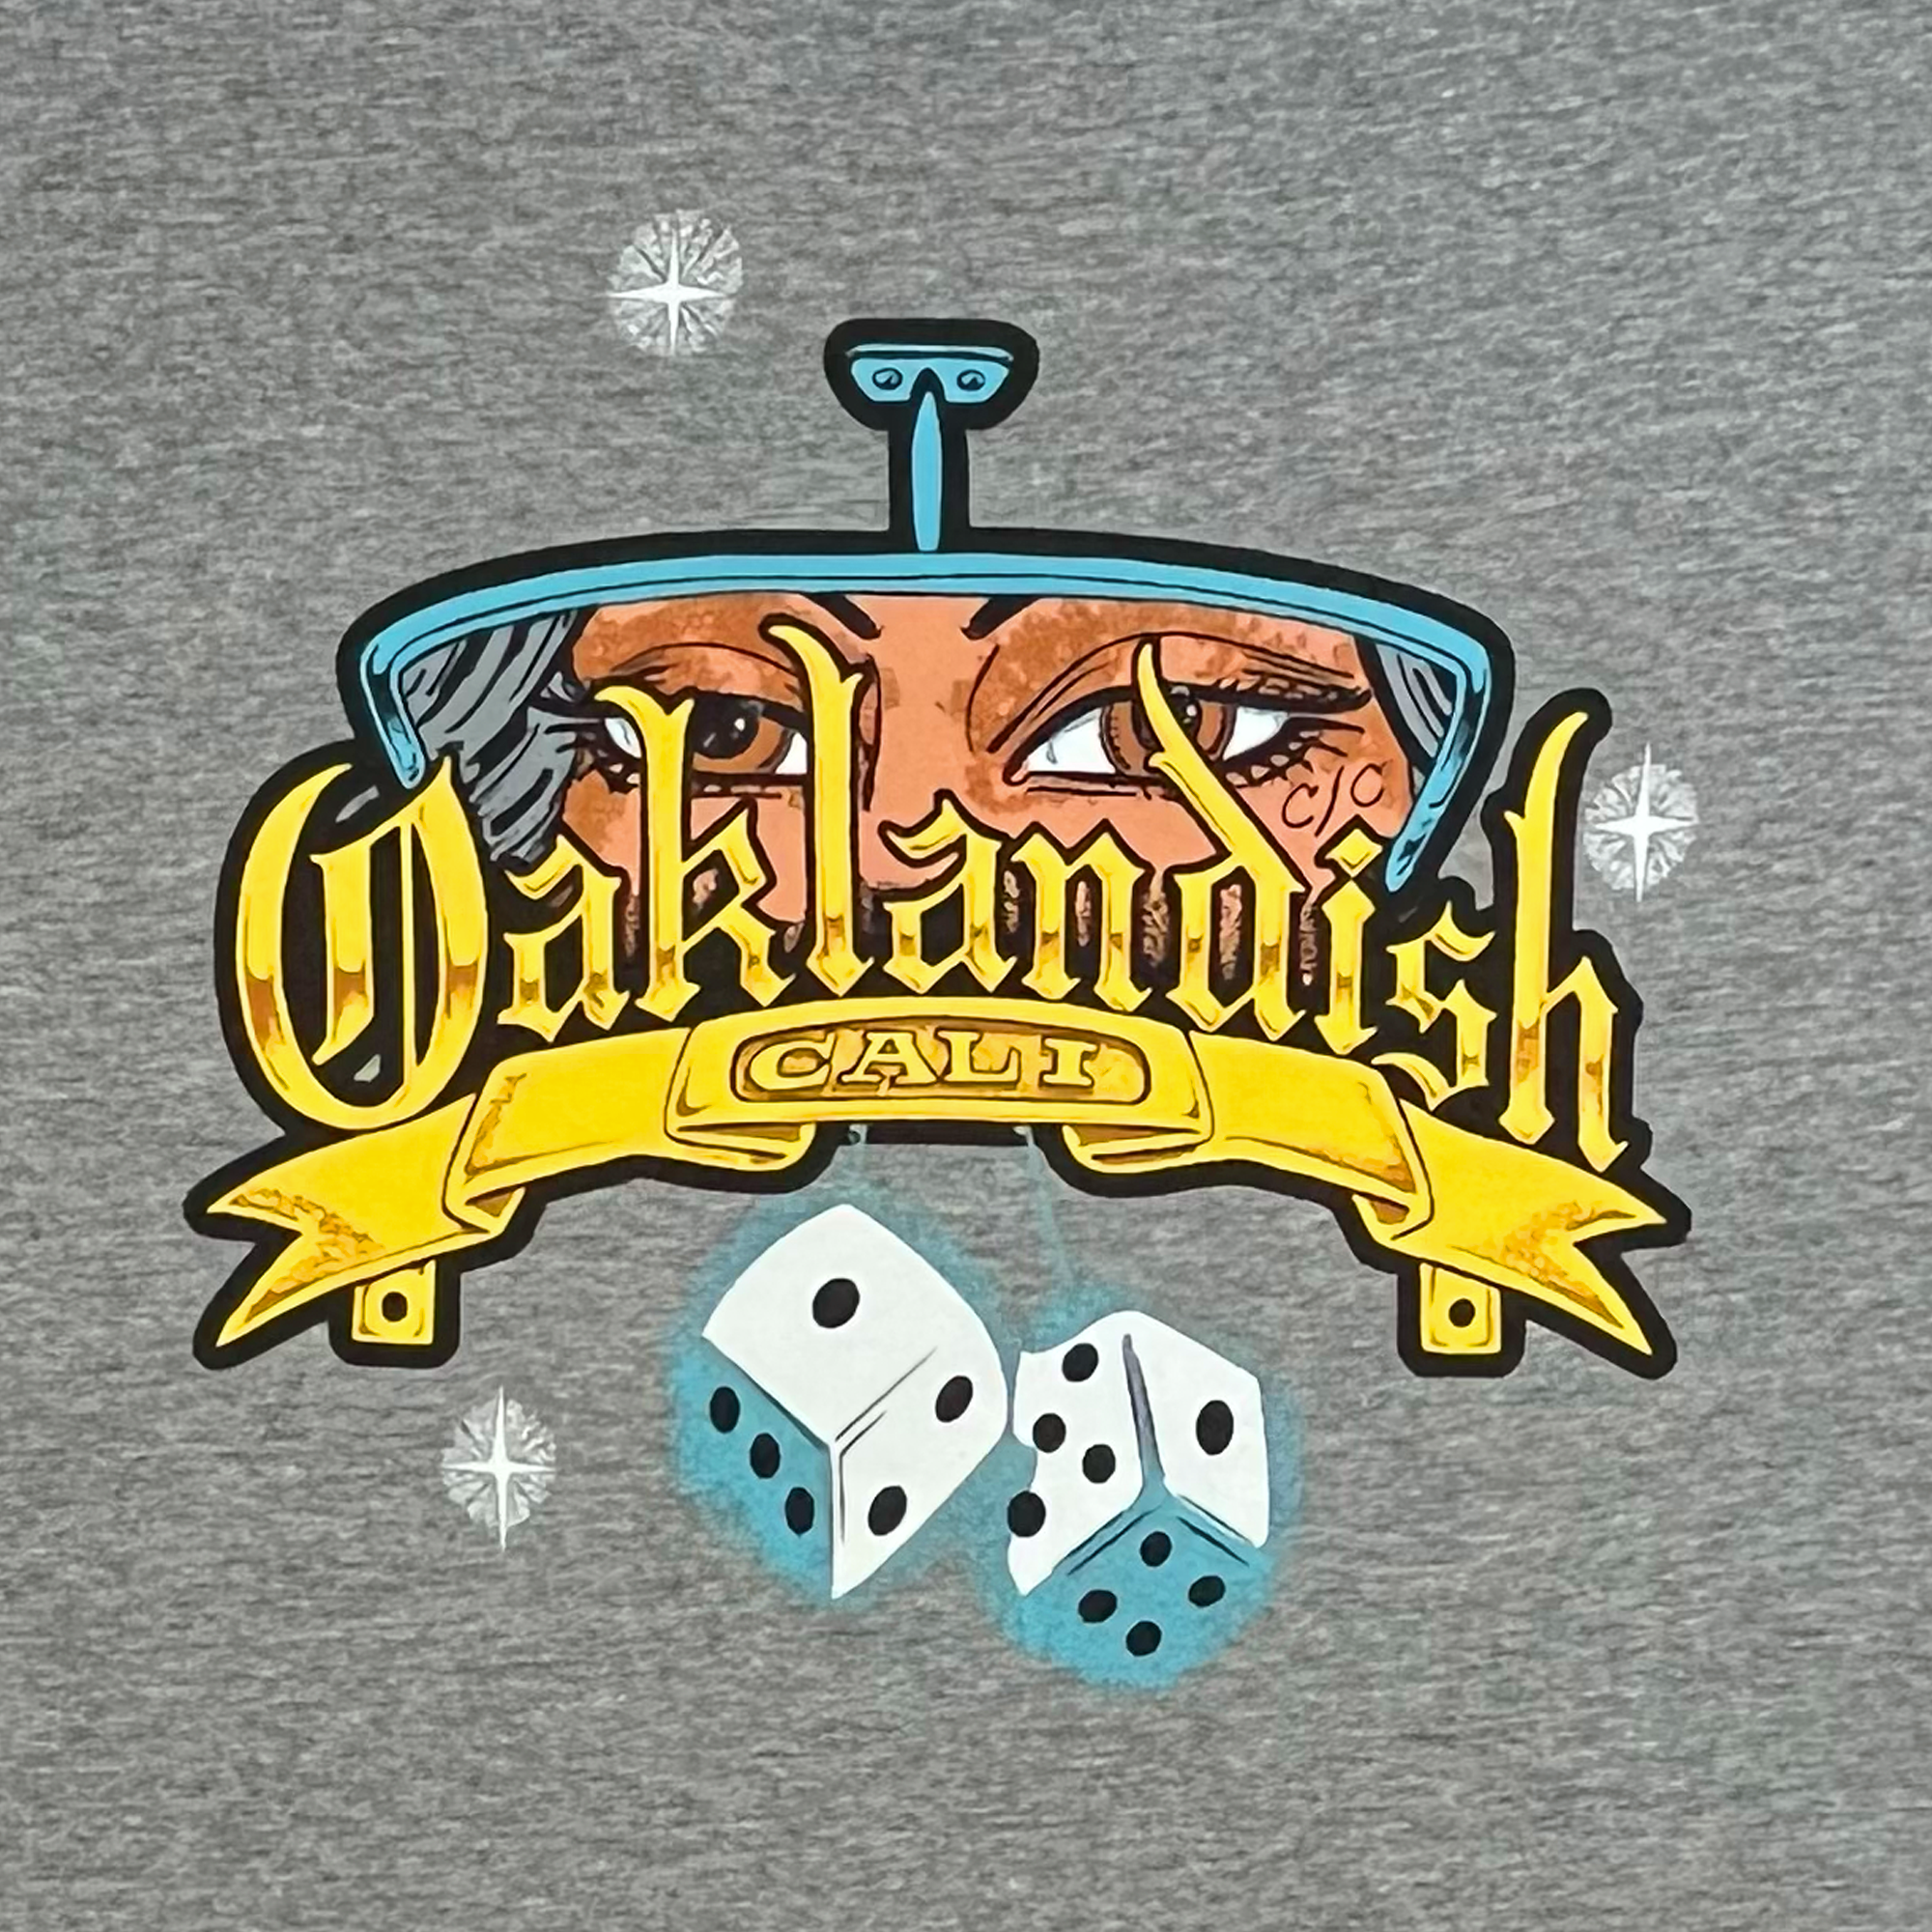  Close-up of Oakland Crusin' graphic featuring a stylized rear view mirror and hanging dice on a heather grey t-shirt.